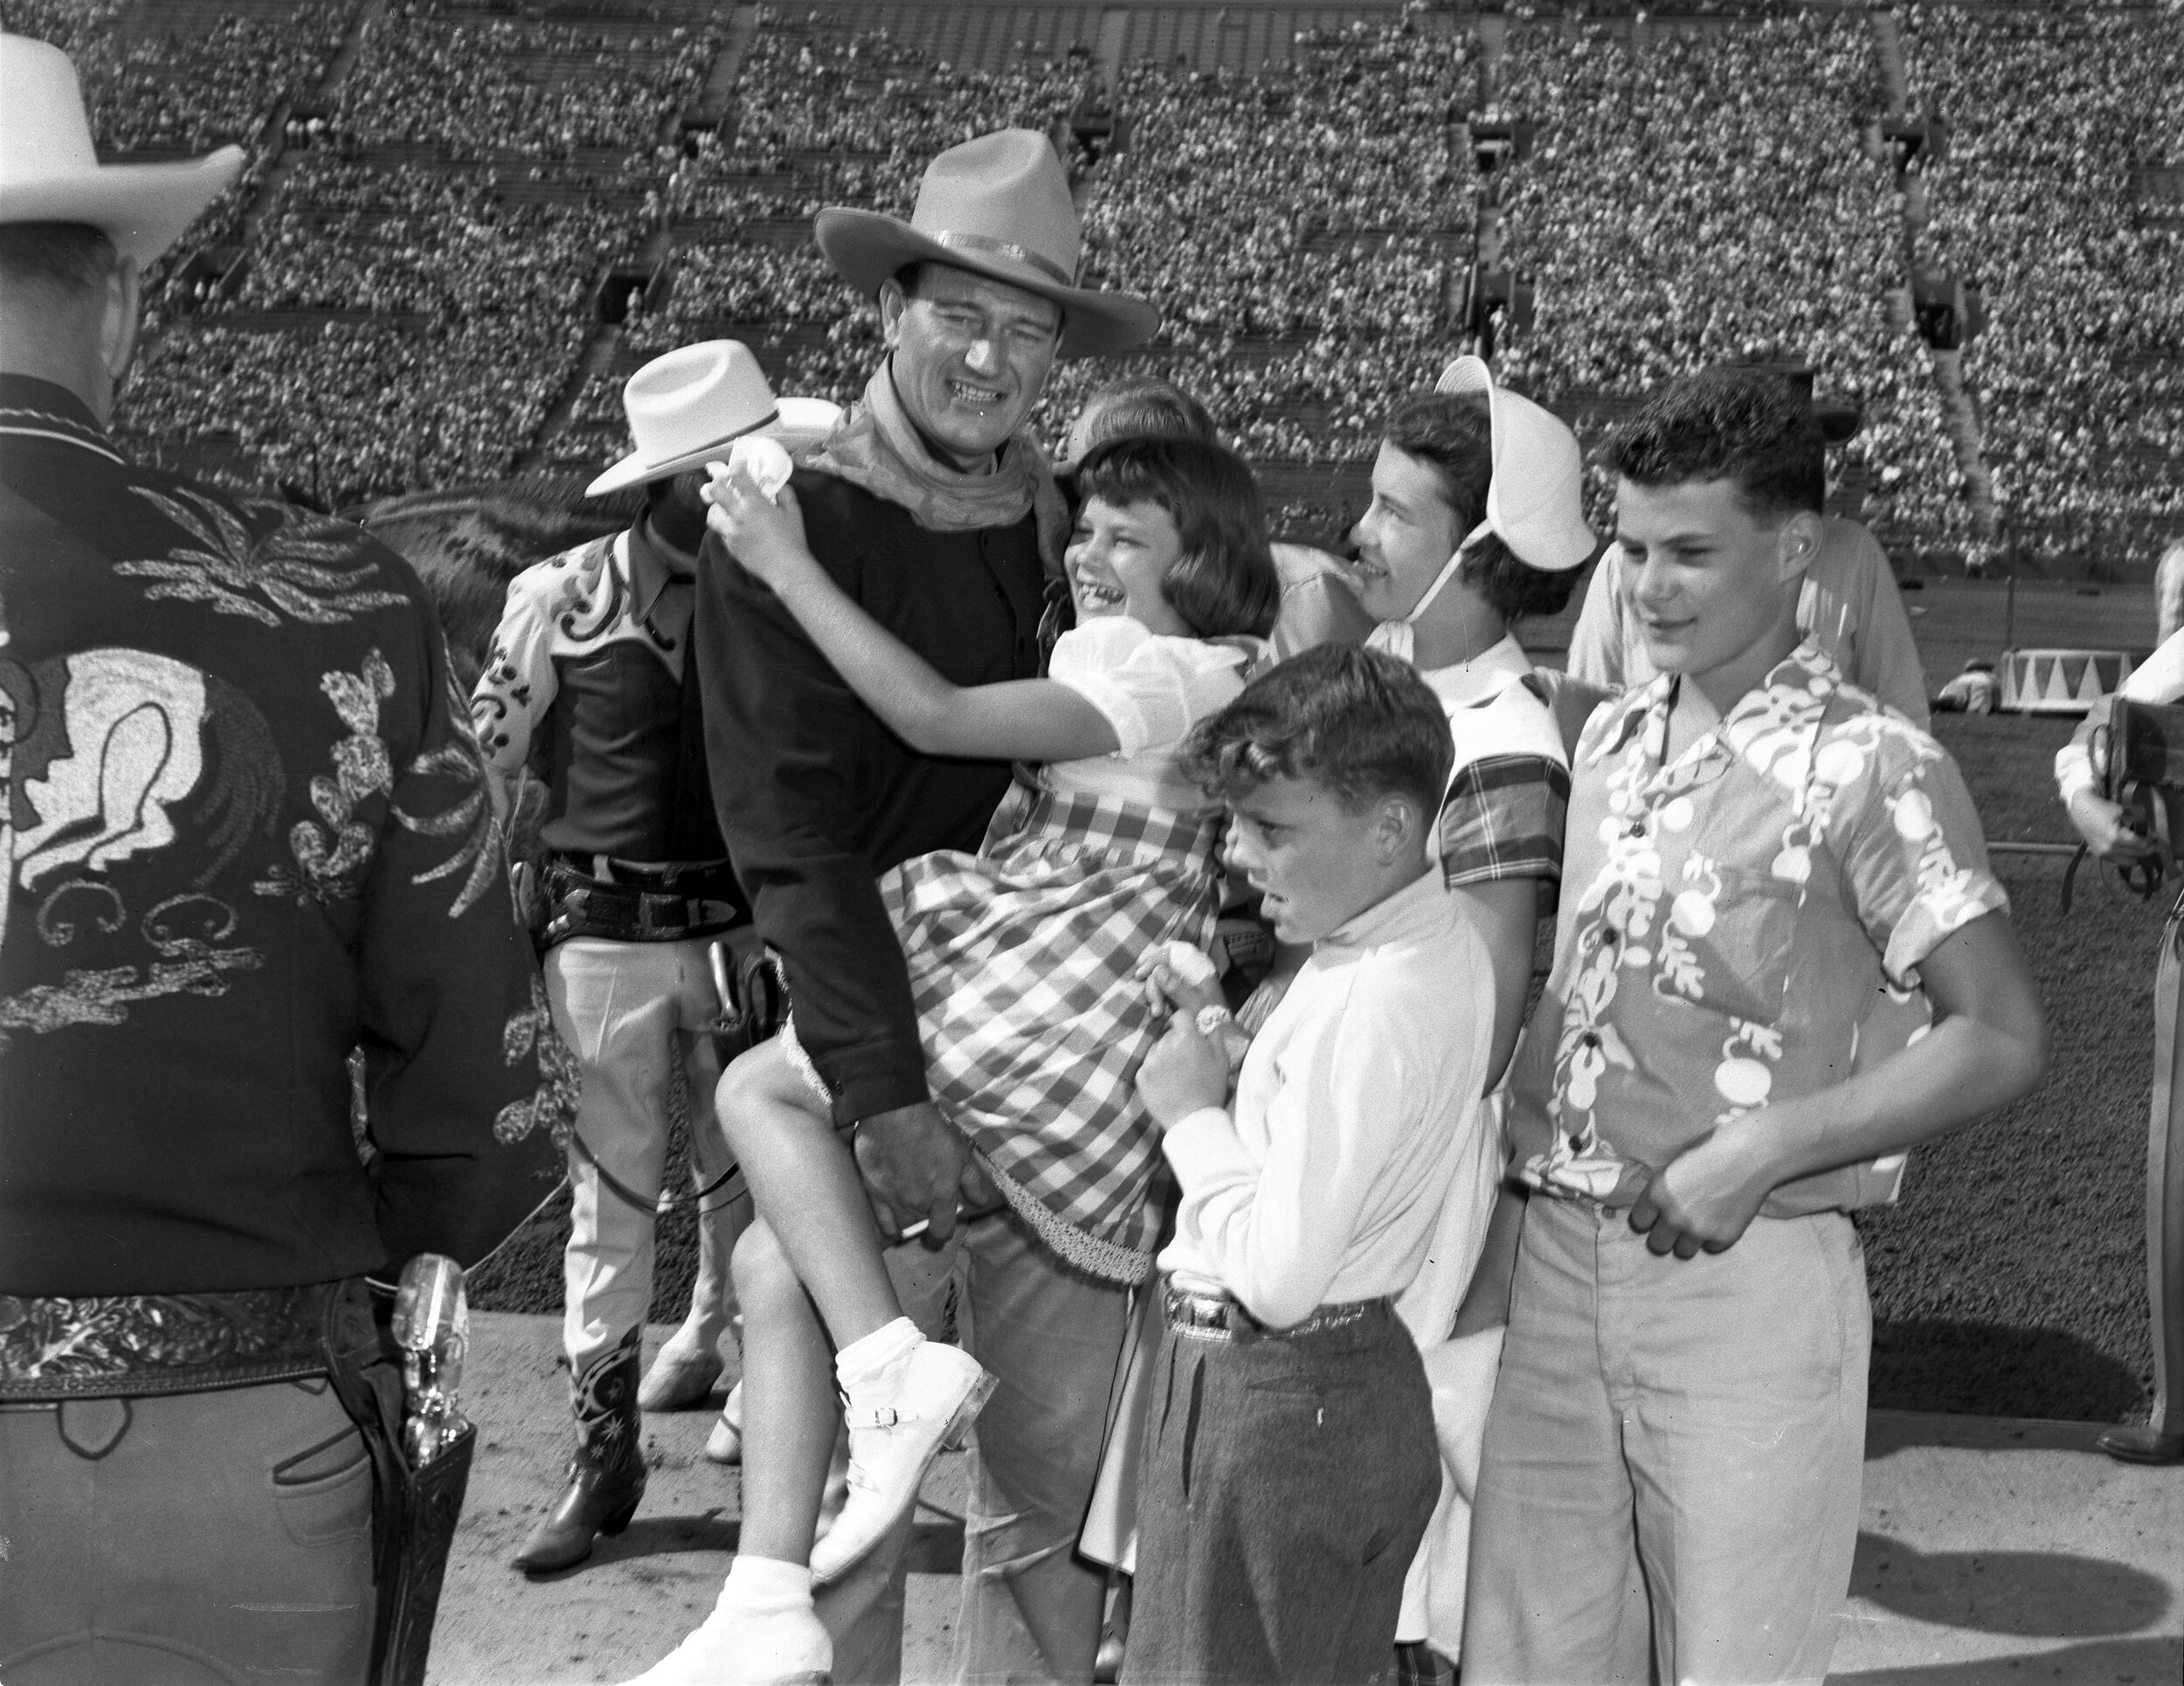 John Wayne with Melinda, Toni, Patrick and Michael (left to right) at a rodeo event.